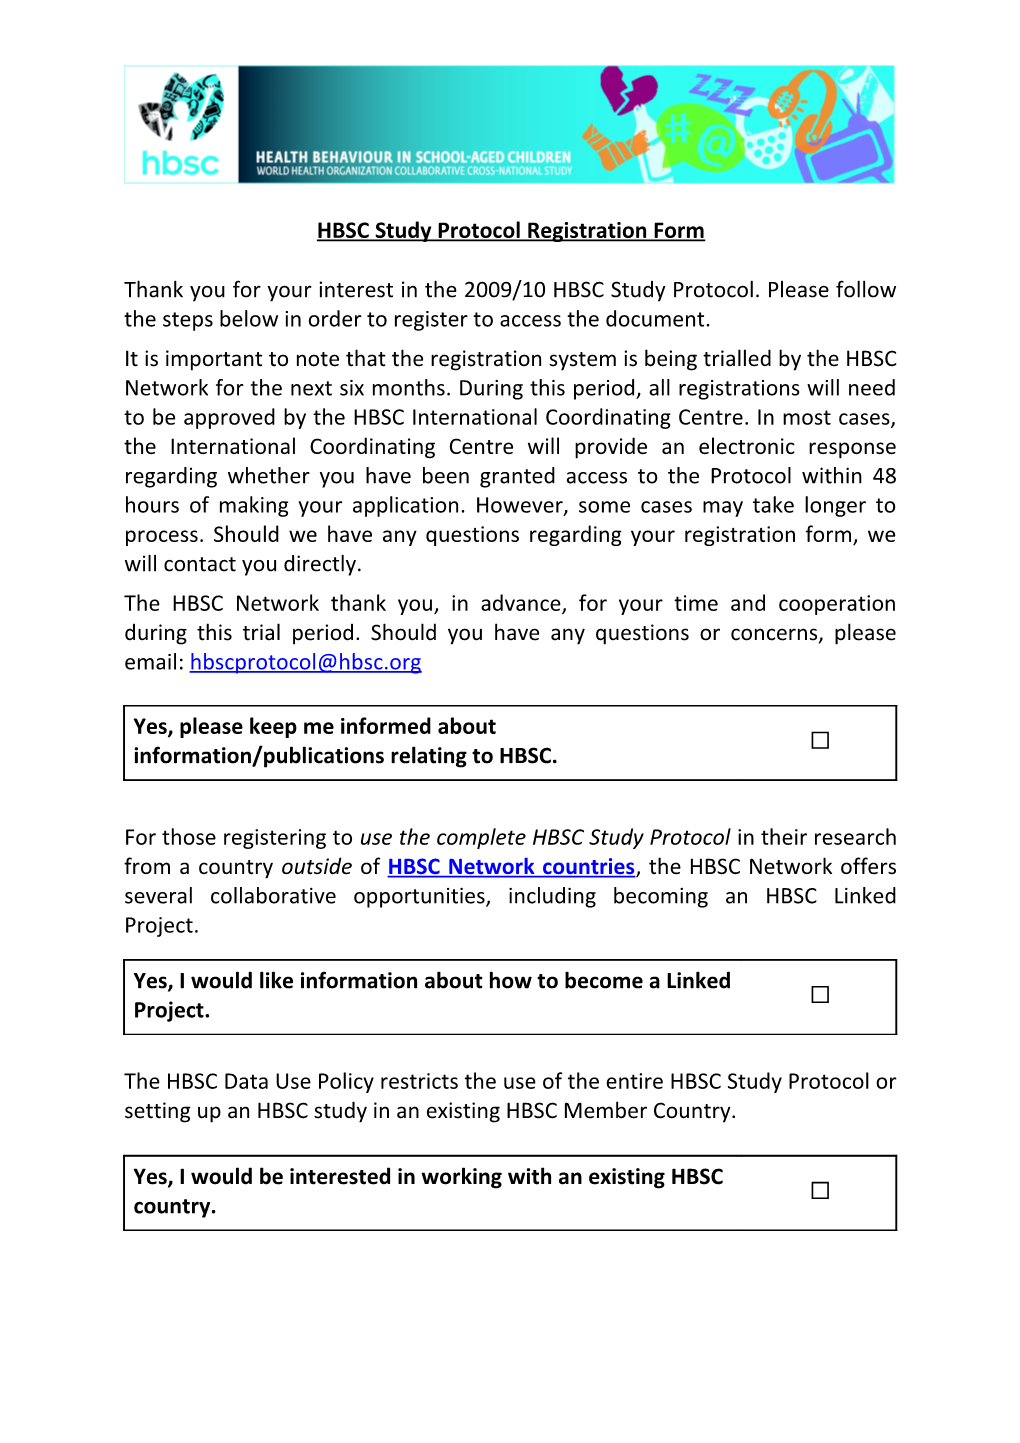 Blurb Before Registration Form on New Protocol Reg Page